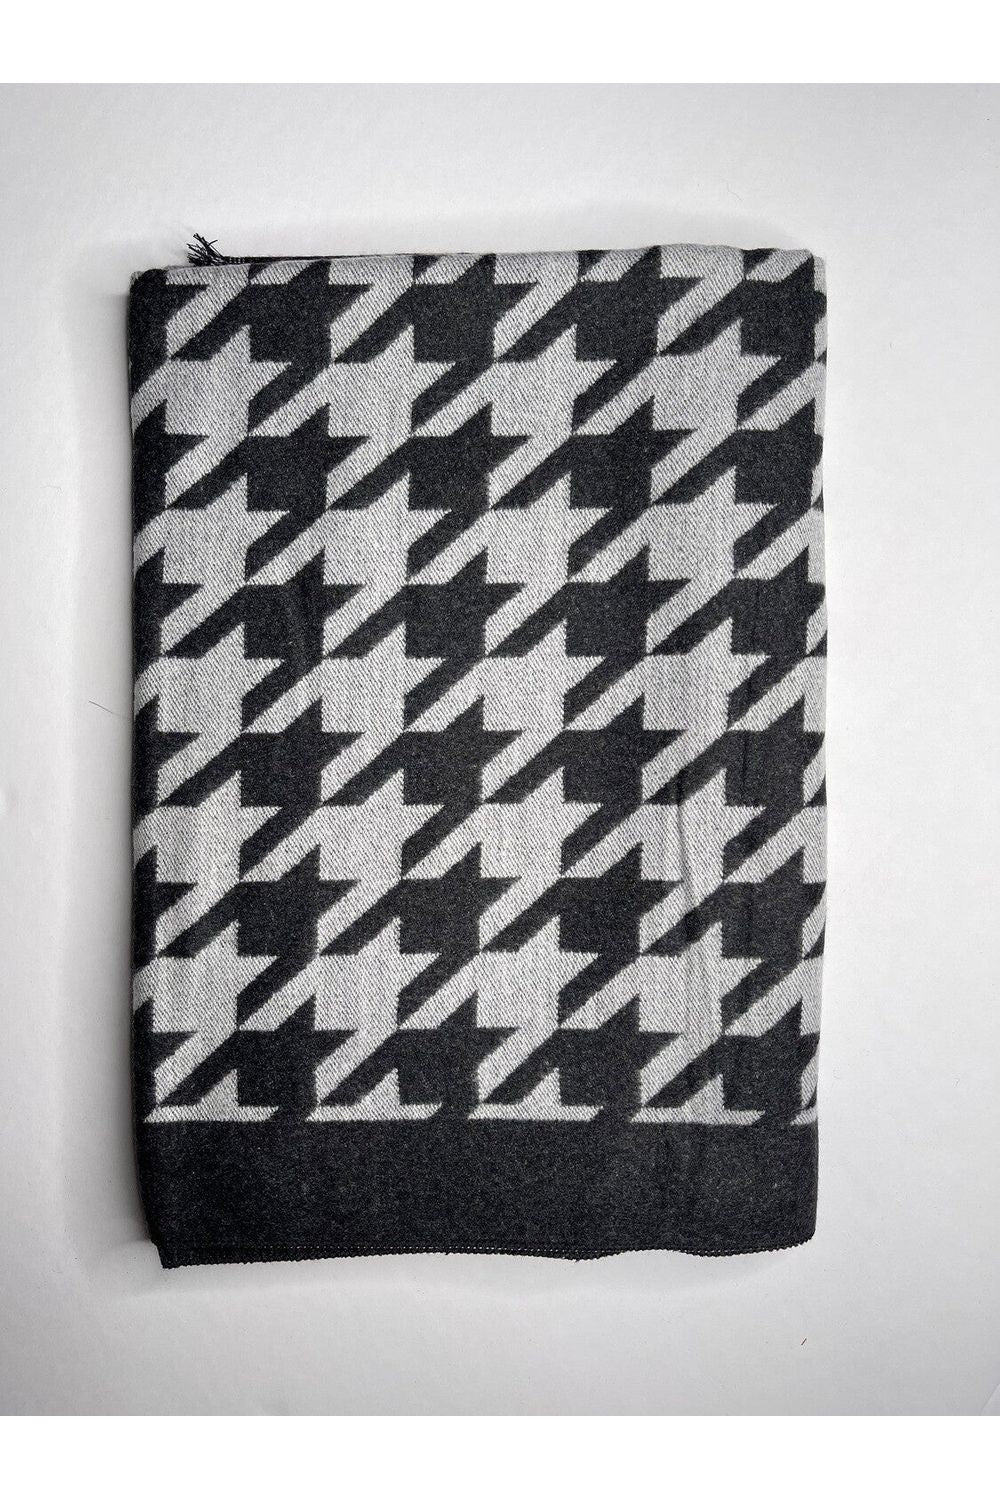 Dark gray houndstooth patterned scarf